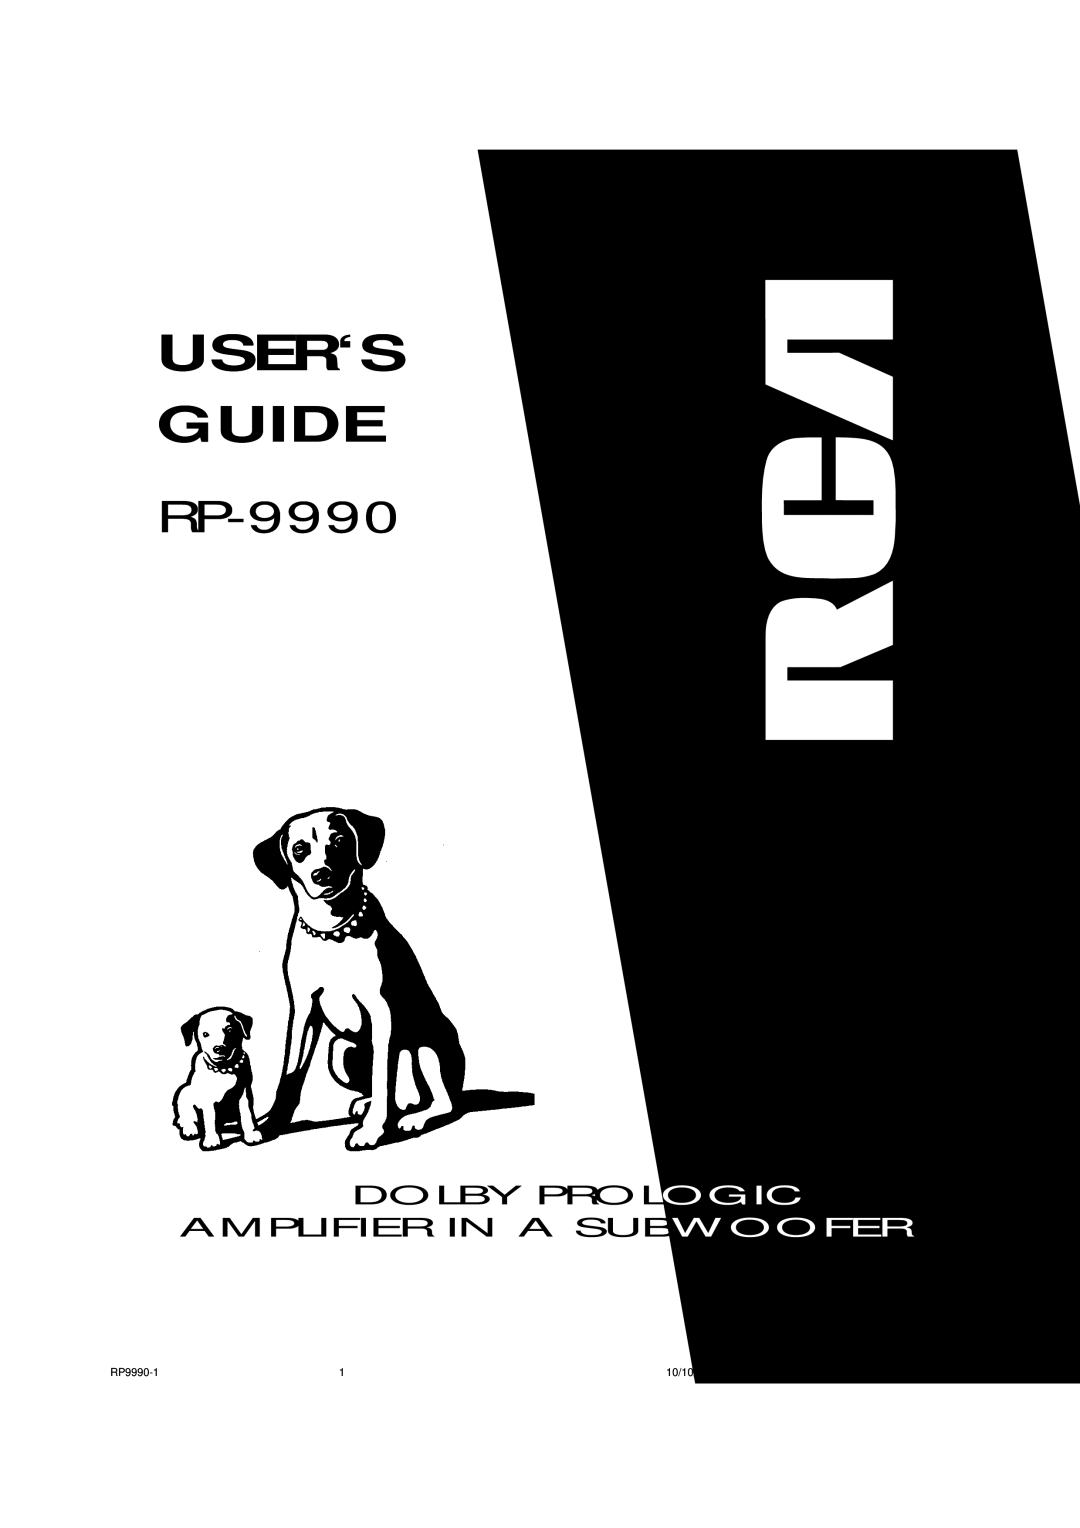 RCA RP-9990 manual User‘S Guide, Dolby Prologic Amplifier In A Subwoofer, RP9990-1, 10/10/00, 11 51 AM 